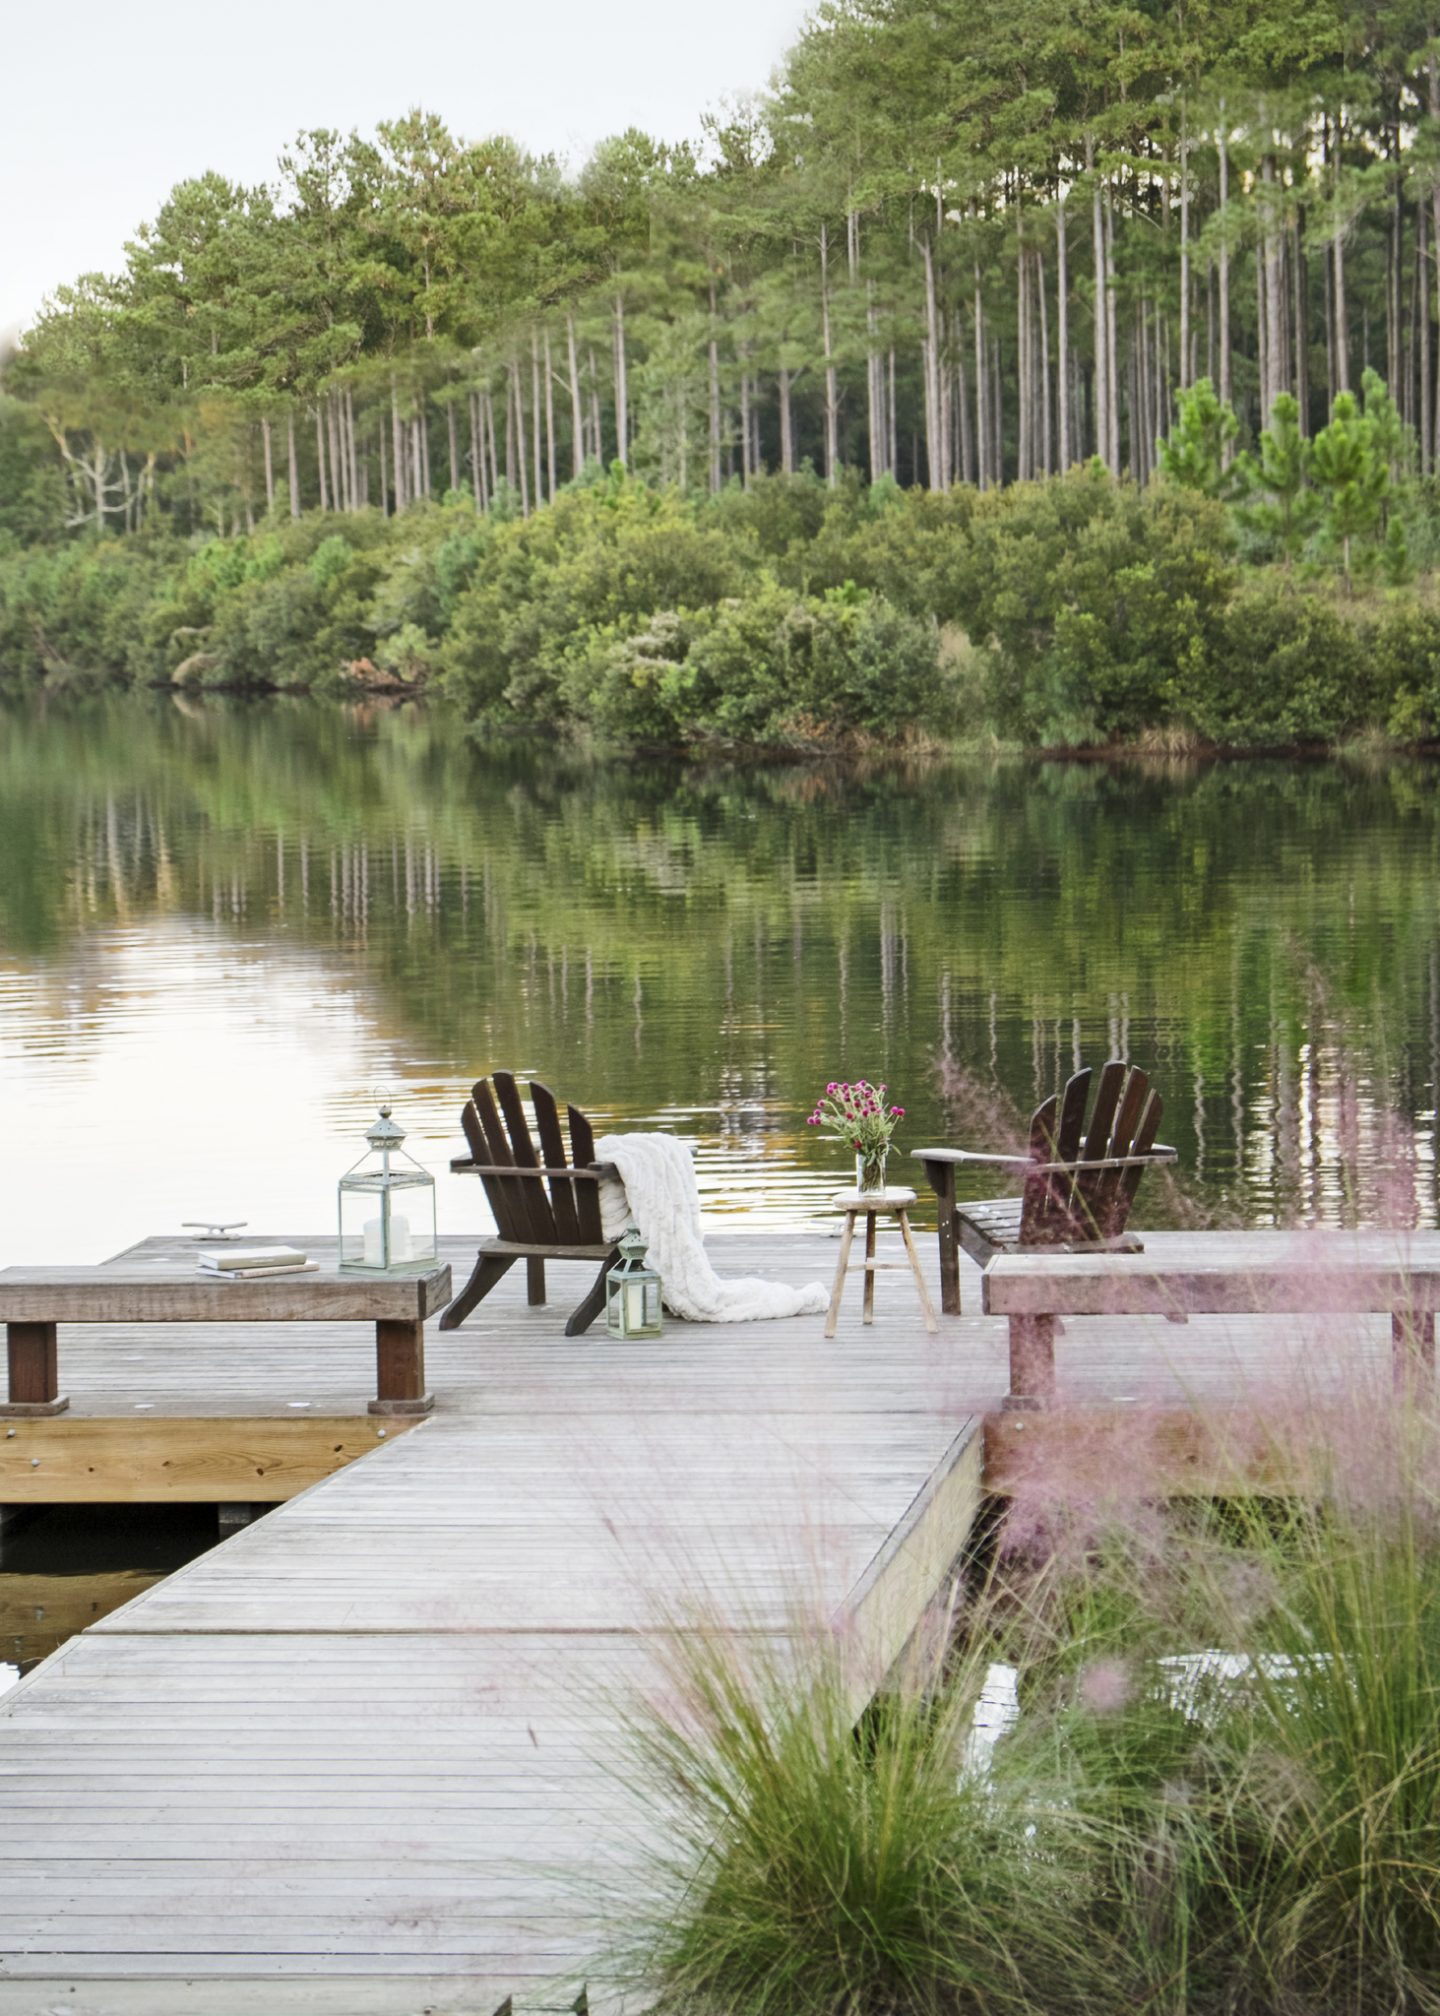 At a Palmetto Bluff property with interior design by Suzanne Kasler, an iconic Low Country dock is the ultimate place to sit, have a drink, and watch the sun rise and set. Adirondack chairs, a rustic three-legged stool, cozy knit throw, and simple lanterns are the recipe for relaxation.